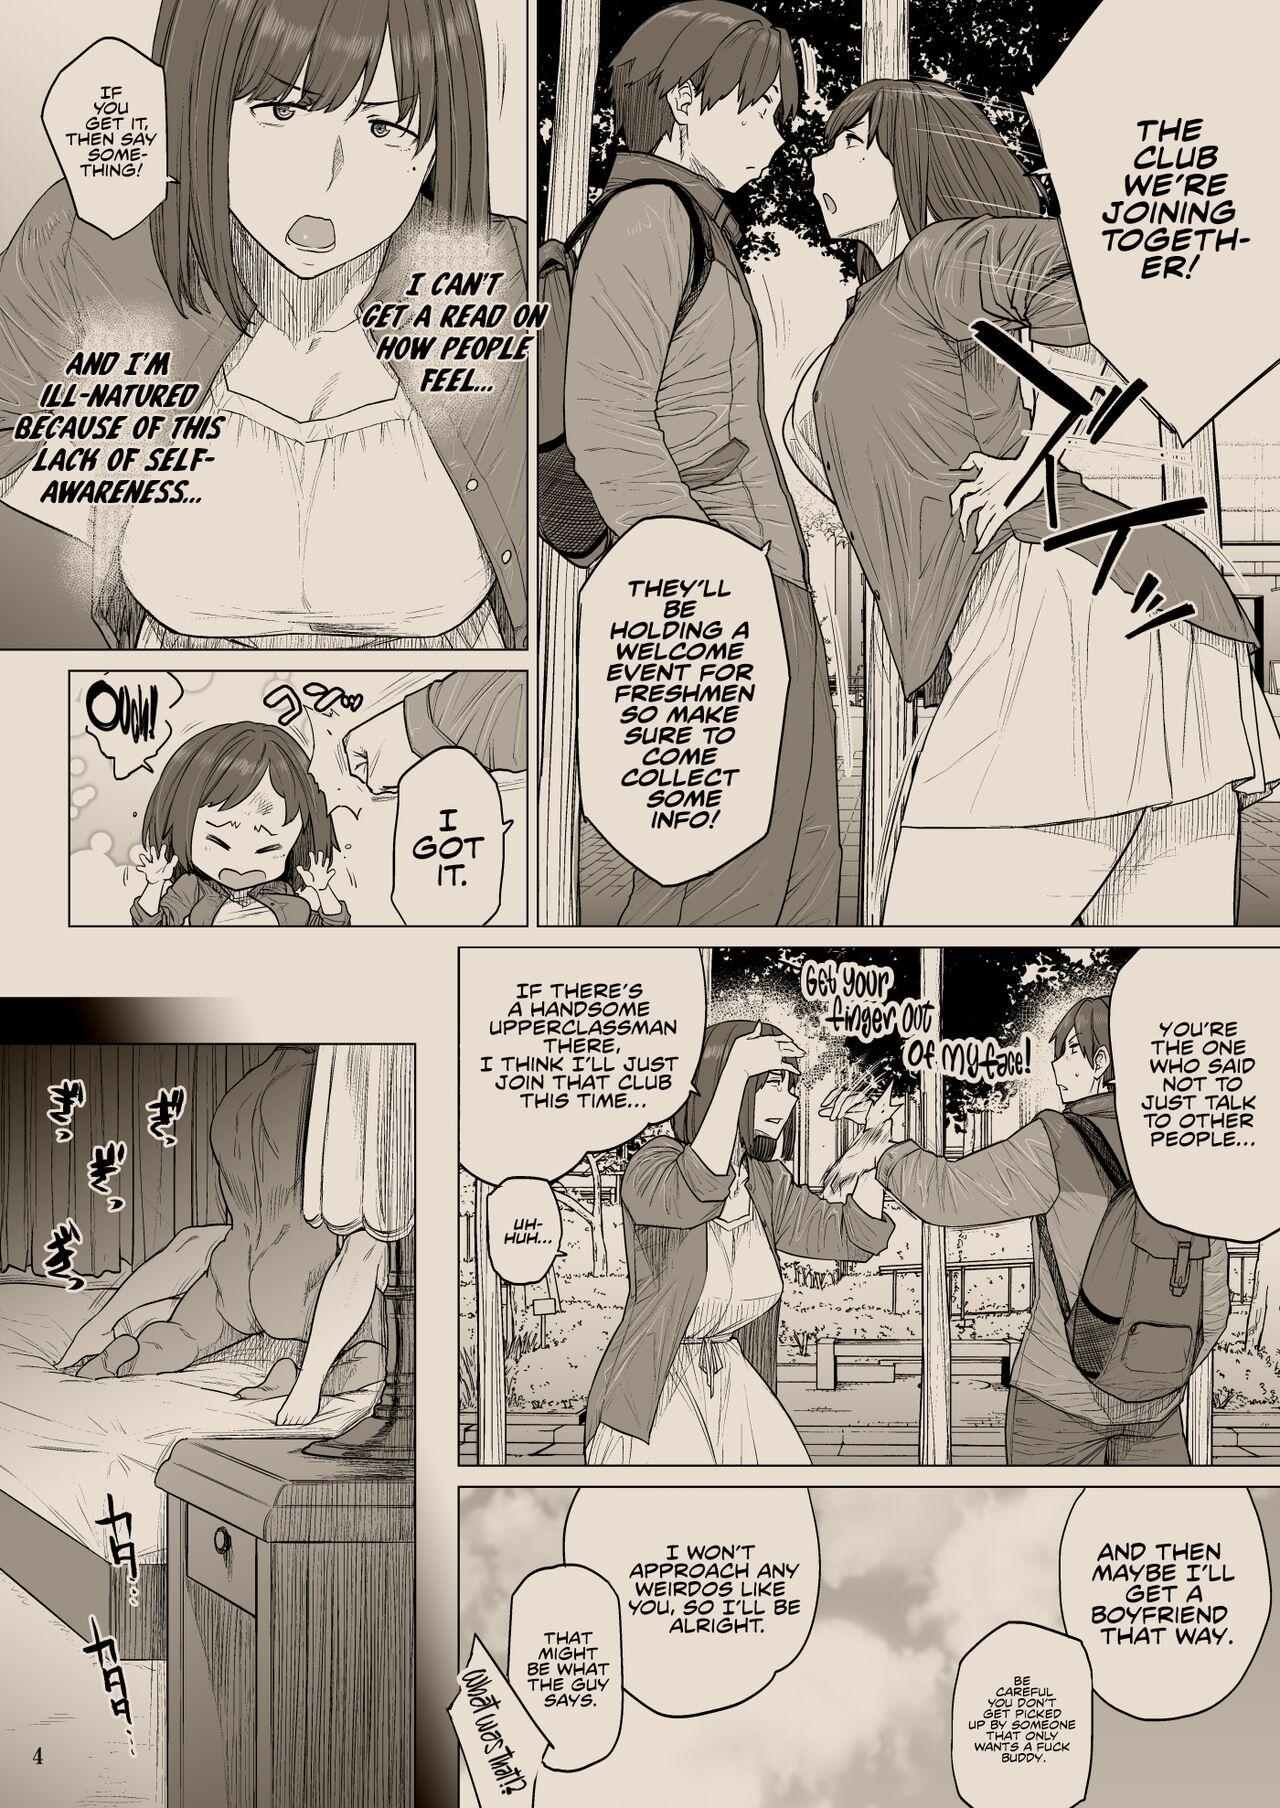 Gorda B.S.S.² - My Smart, Beautiful Childhood Friend That I Loved First Became an Assistant of an Upperclassman’s Club and He Did Whatever He Pleased to Her - Original Cfnm - Page 3